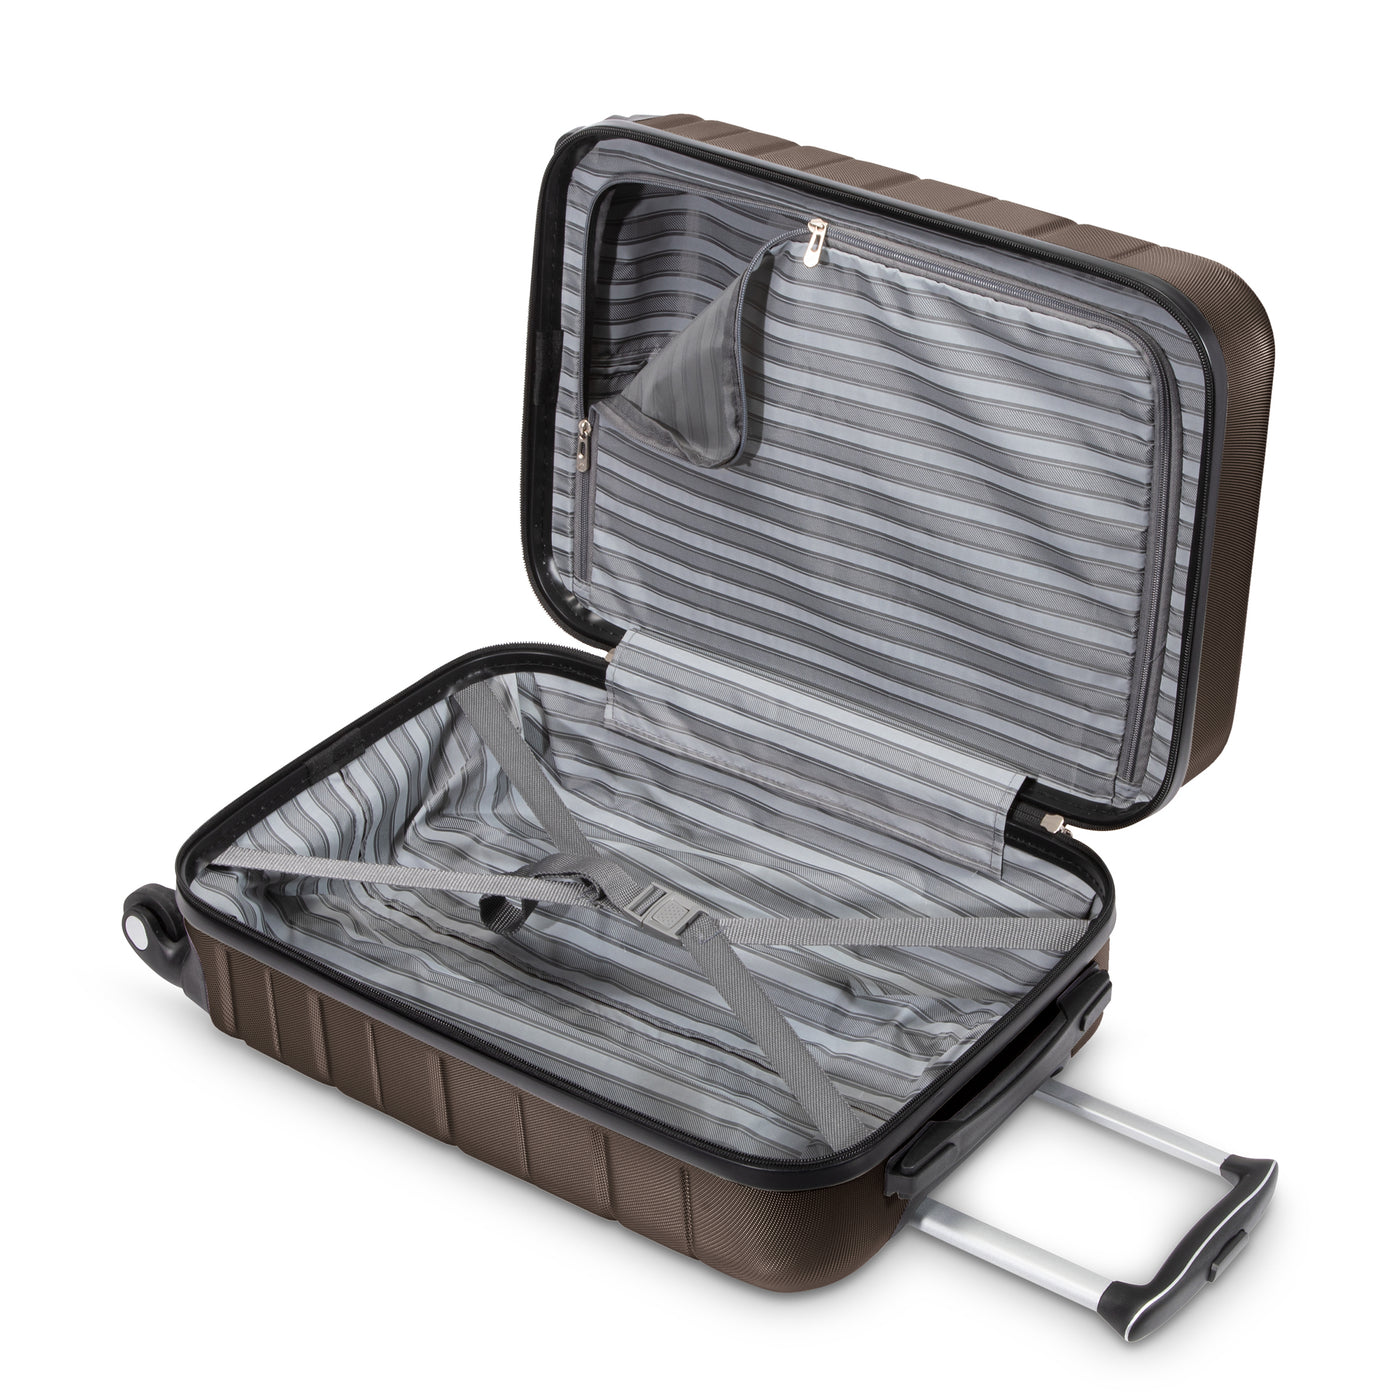 Epic 20-inch Carry-On Spinner Suitcase | Skyway Luggage